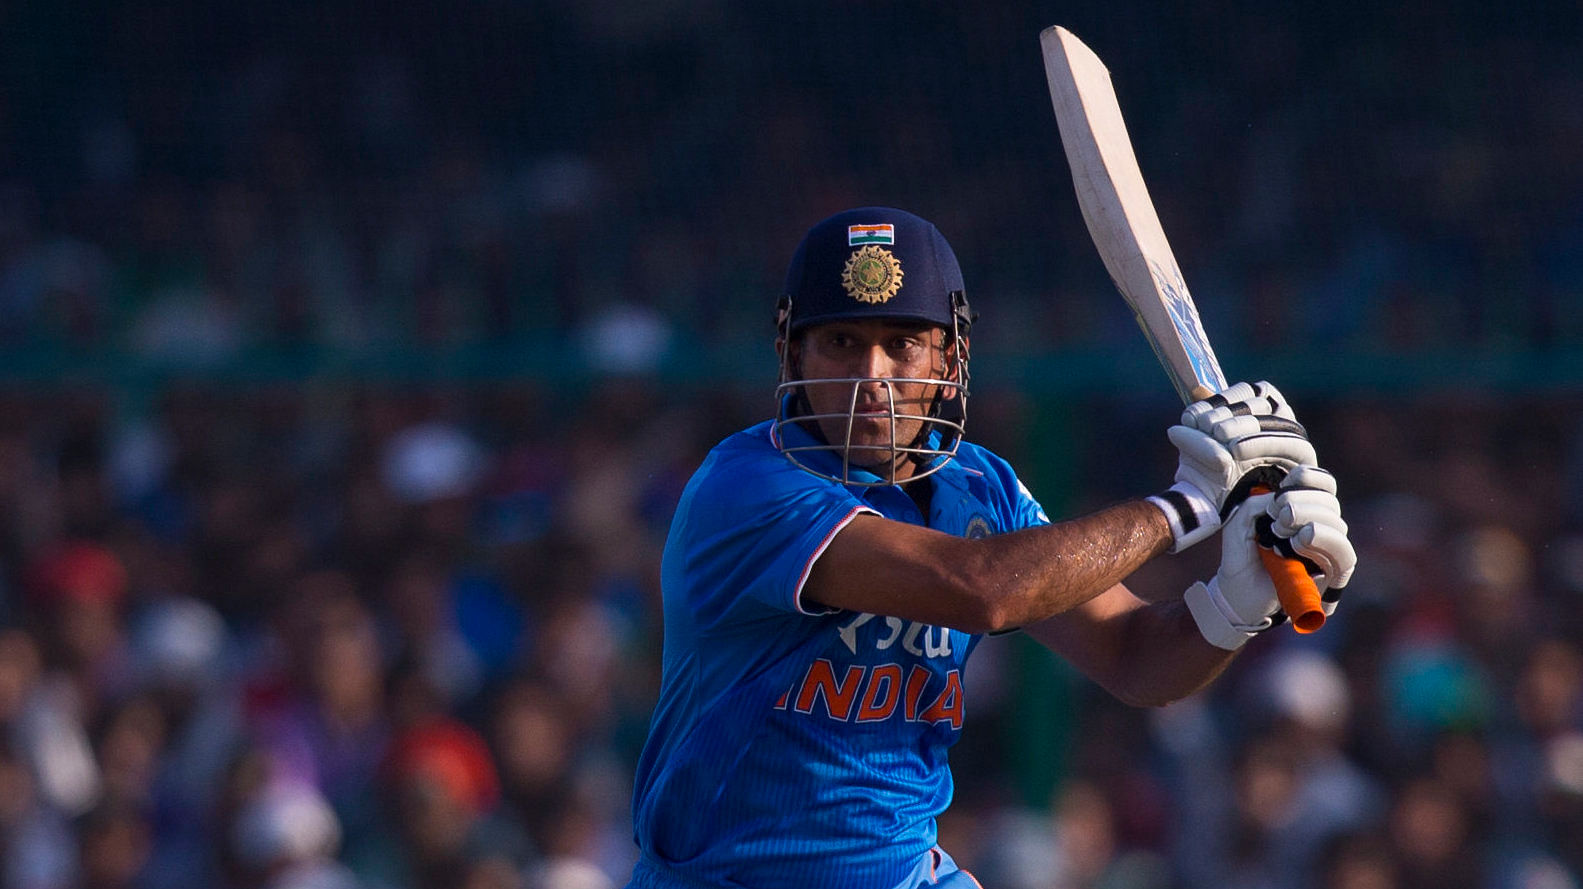 MS Dhoni scored an unbeaten 92 to take India to a respectable total of 247/9. (Photo: AP)